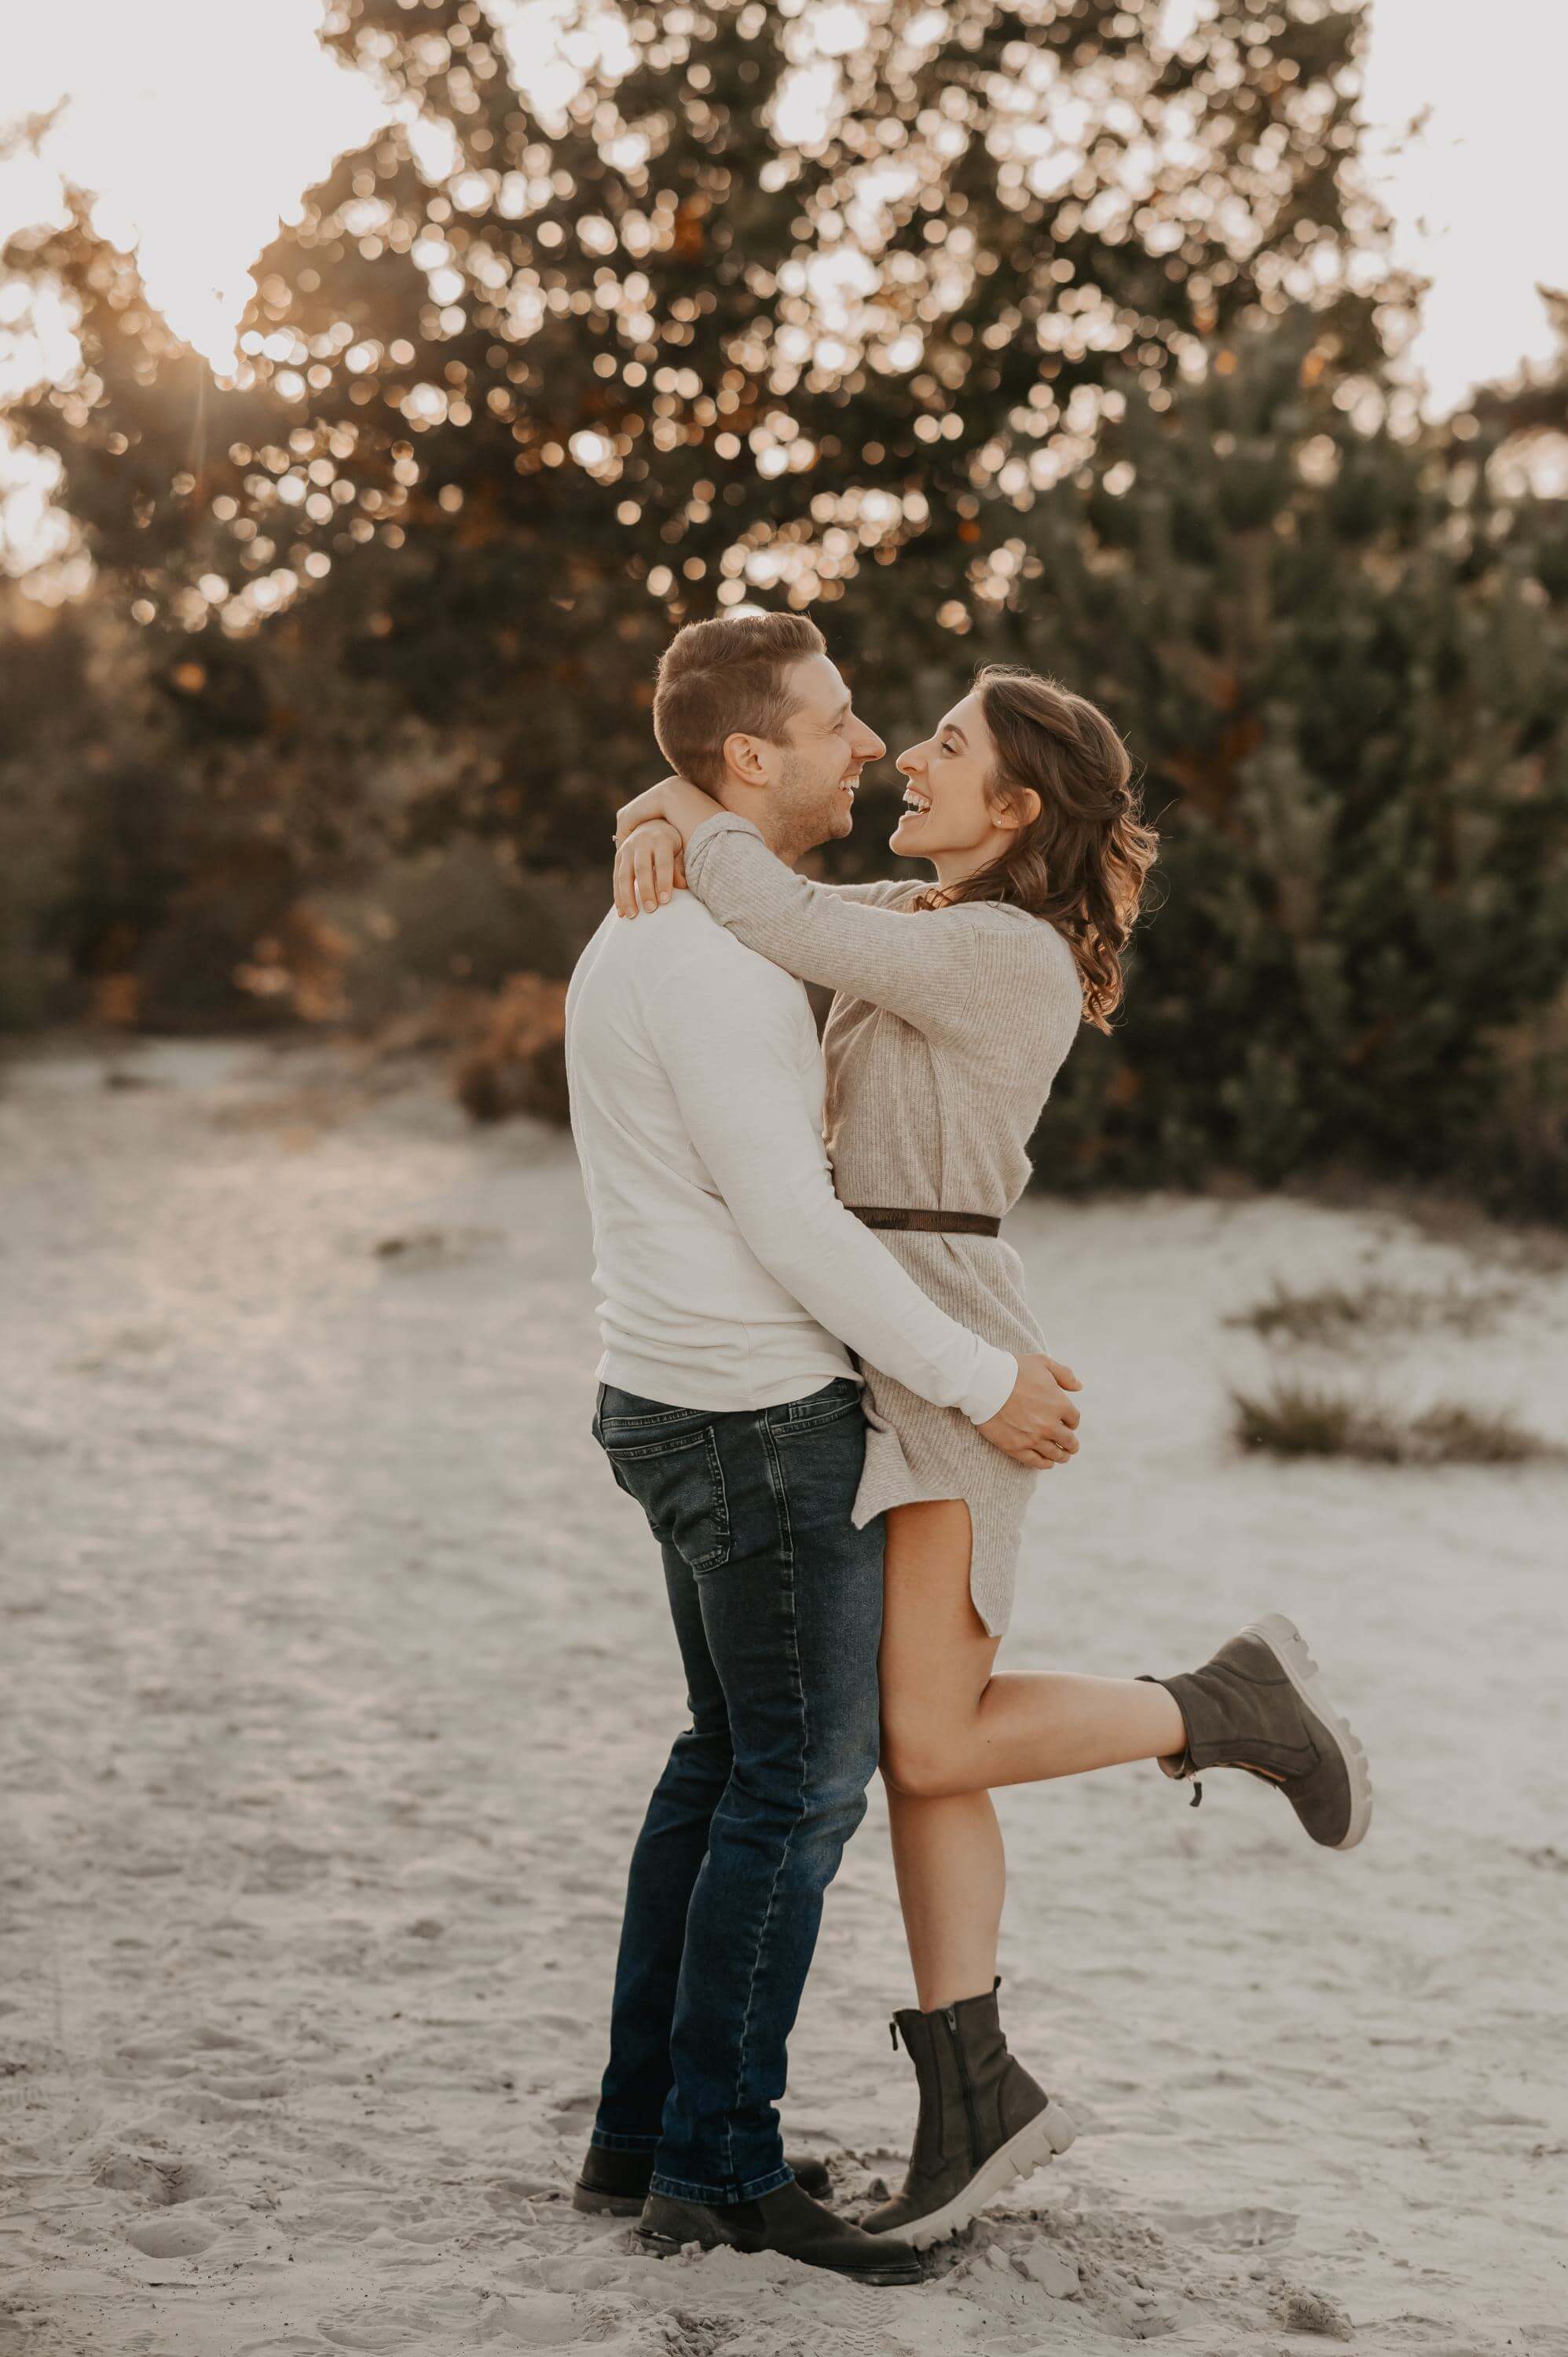 A young couple stands in a tight embrace on the heath sand and both look deep into each other's eyes while she has put her arms around his neck and bends one leg.